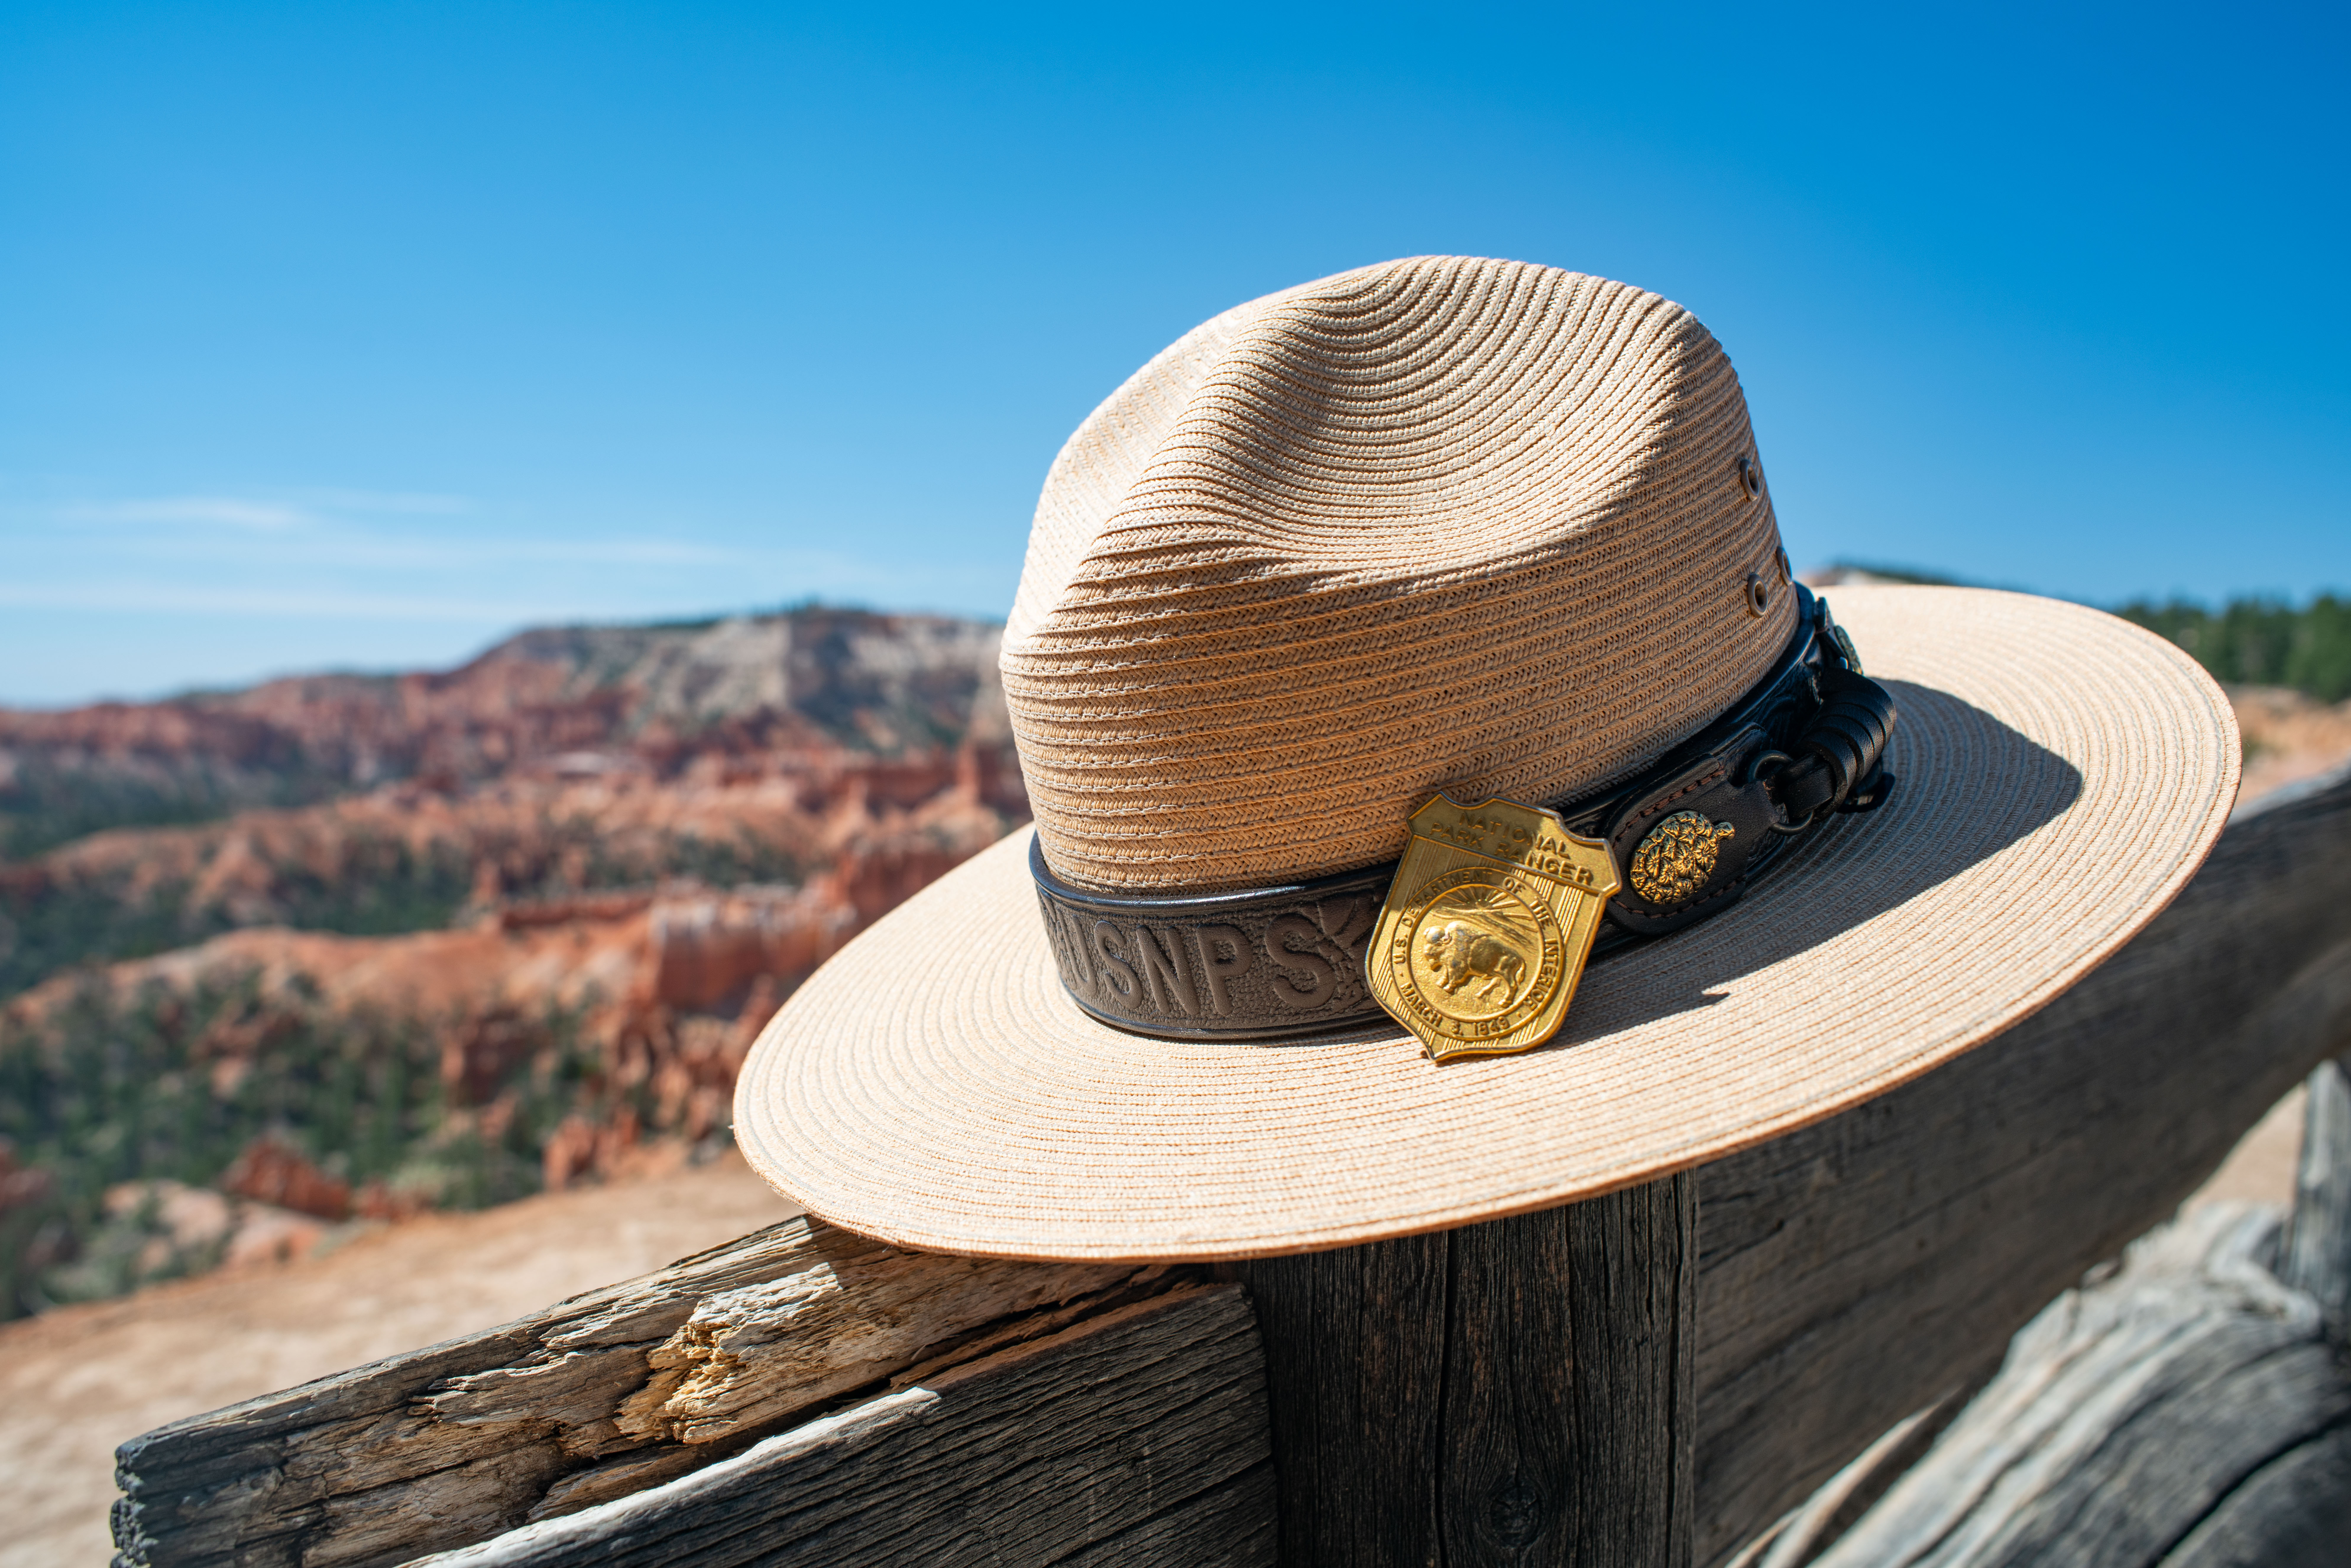 A national park service ranger hat and badge rests on a wooden bench